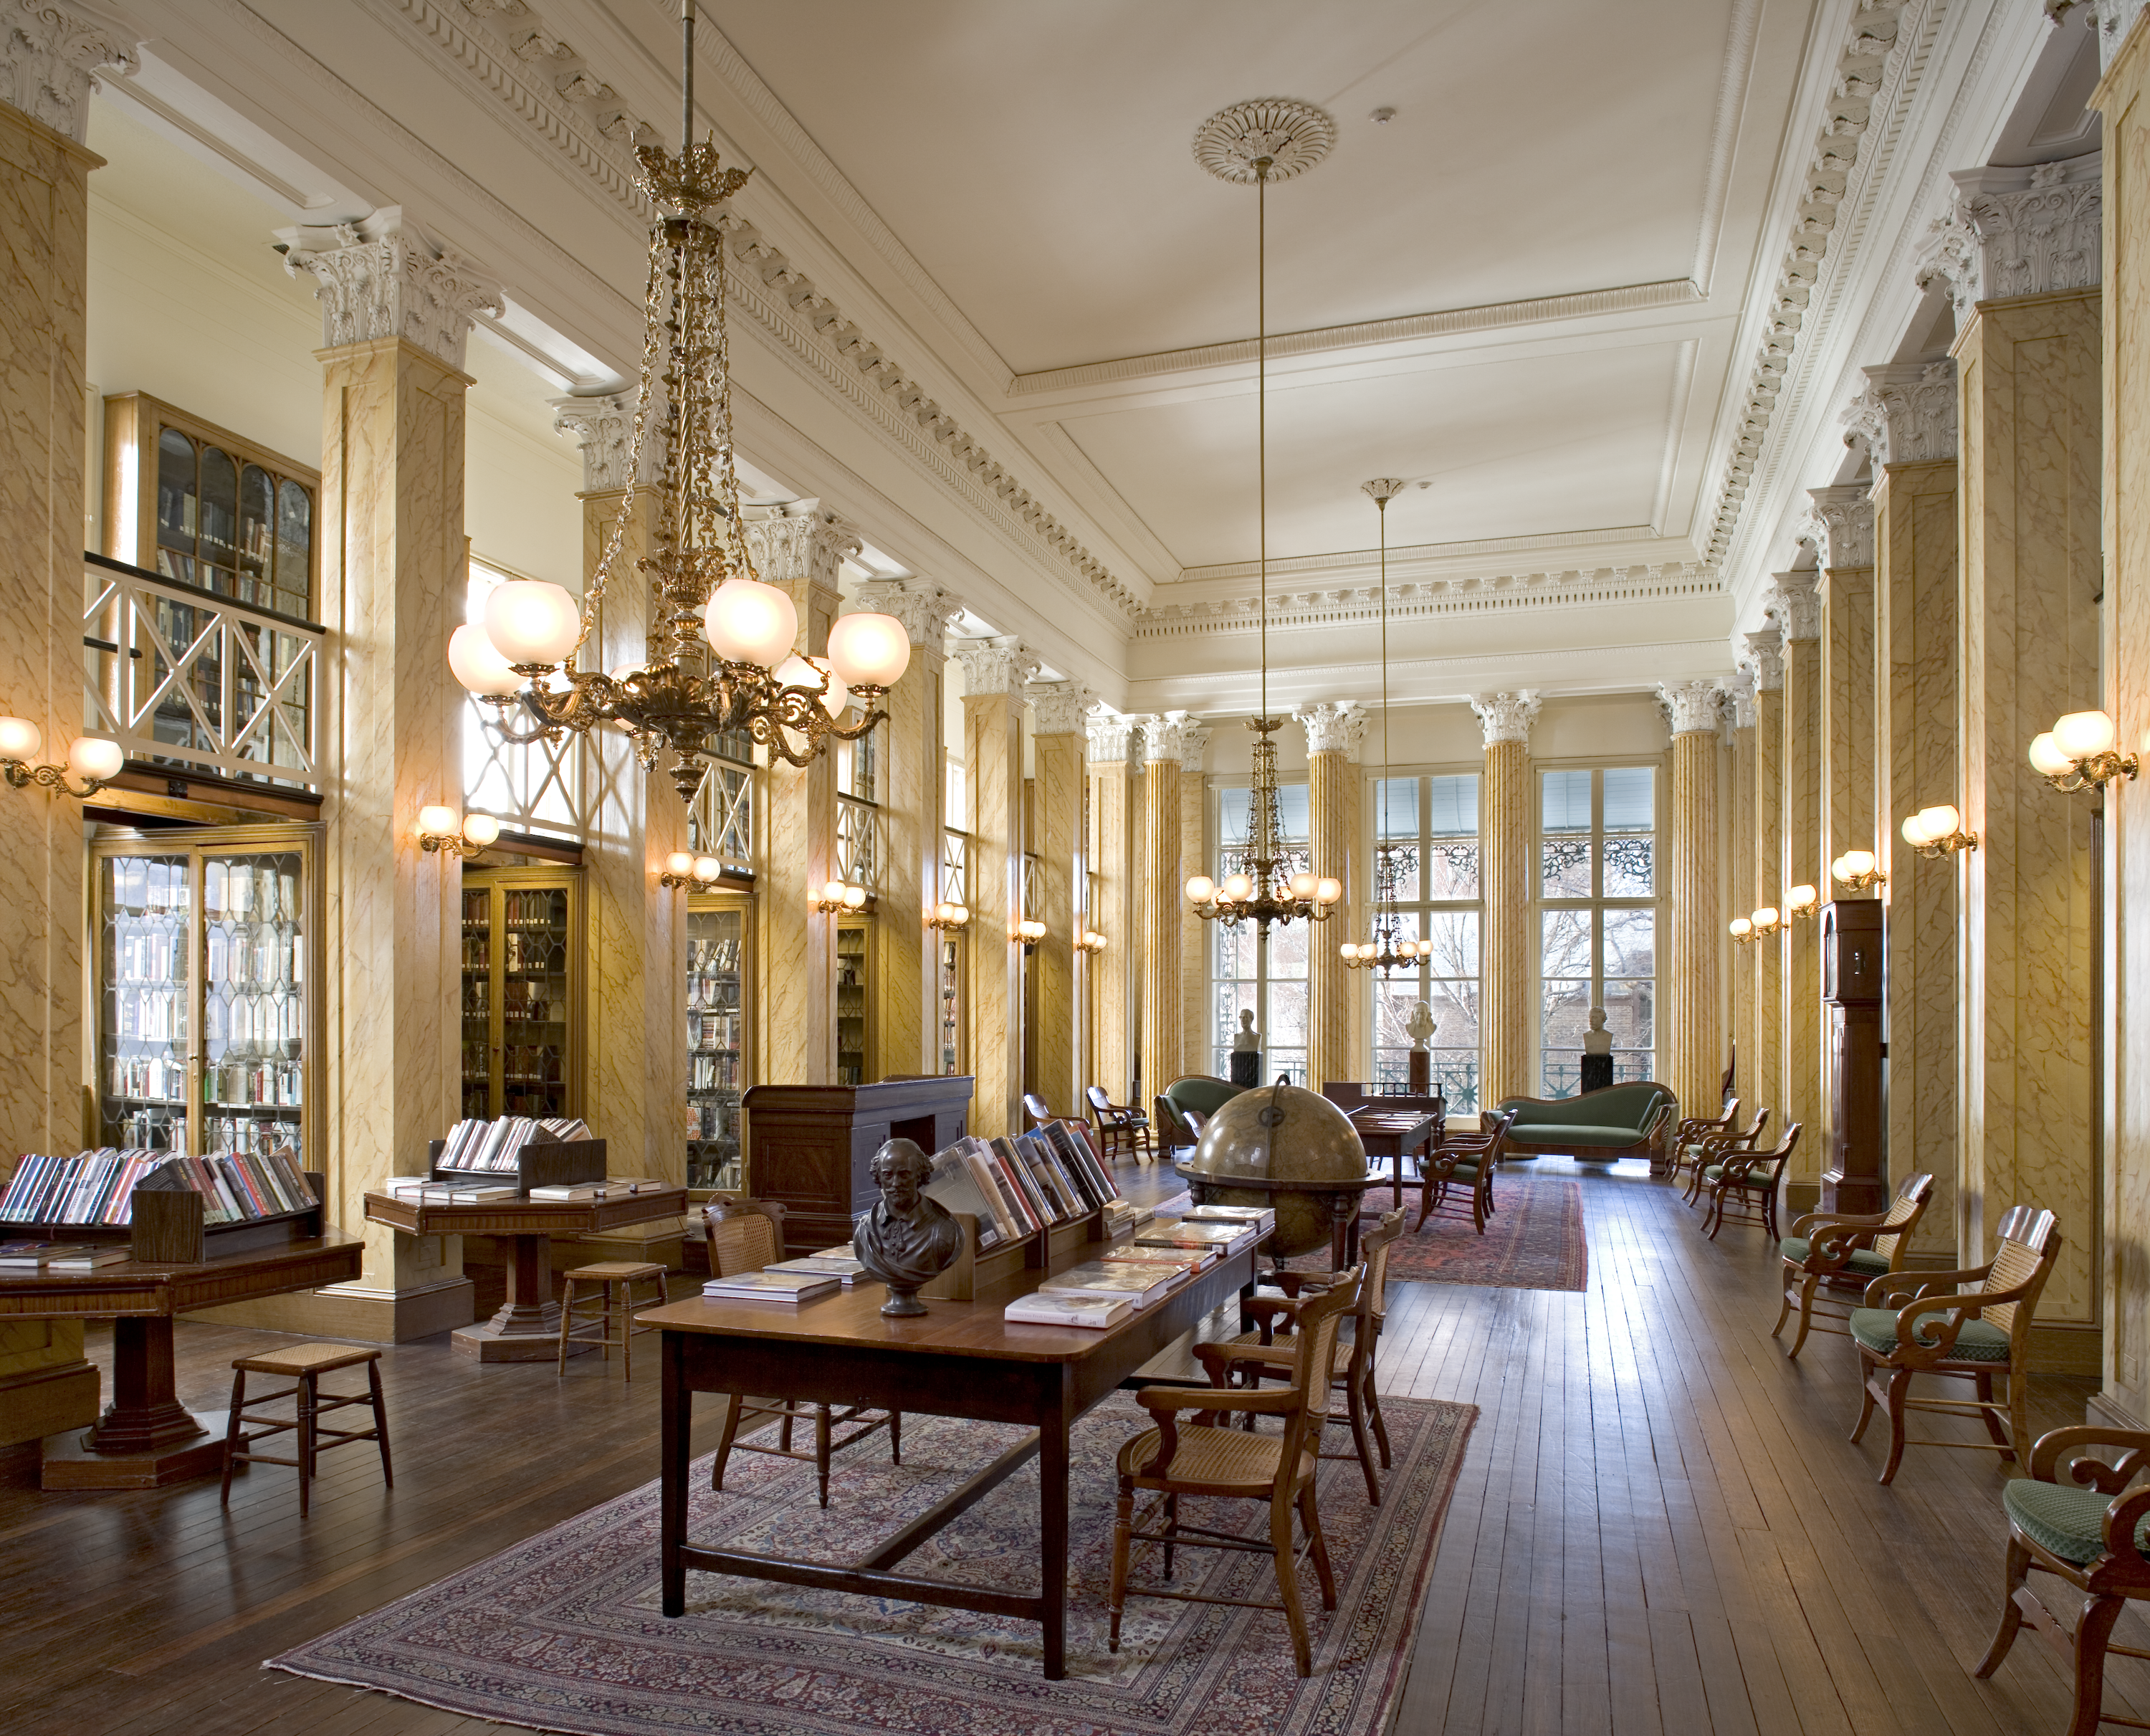 One of the two reading rooms in The Athenaeum of Philadelphia (photo credit: Tom Crane)